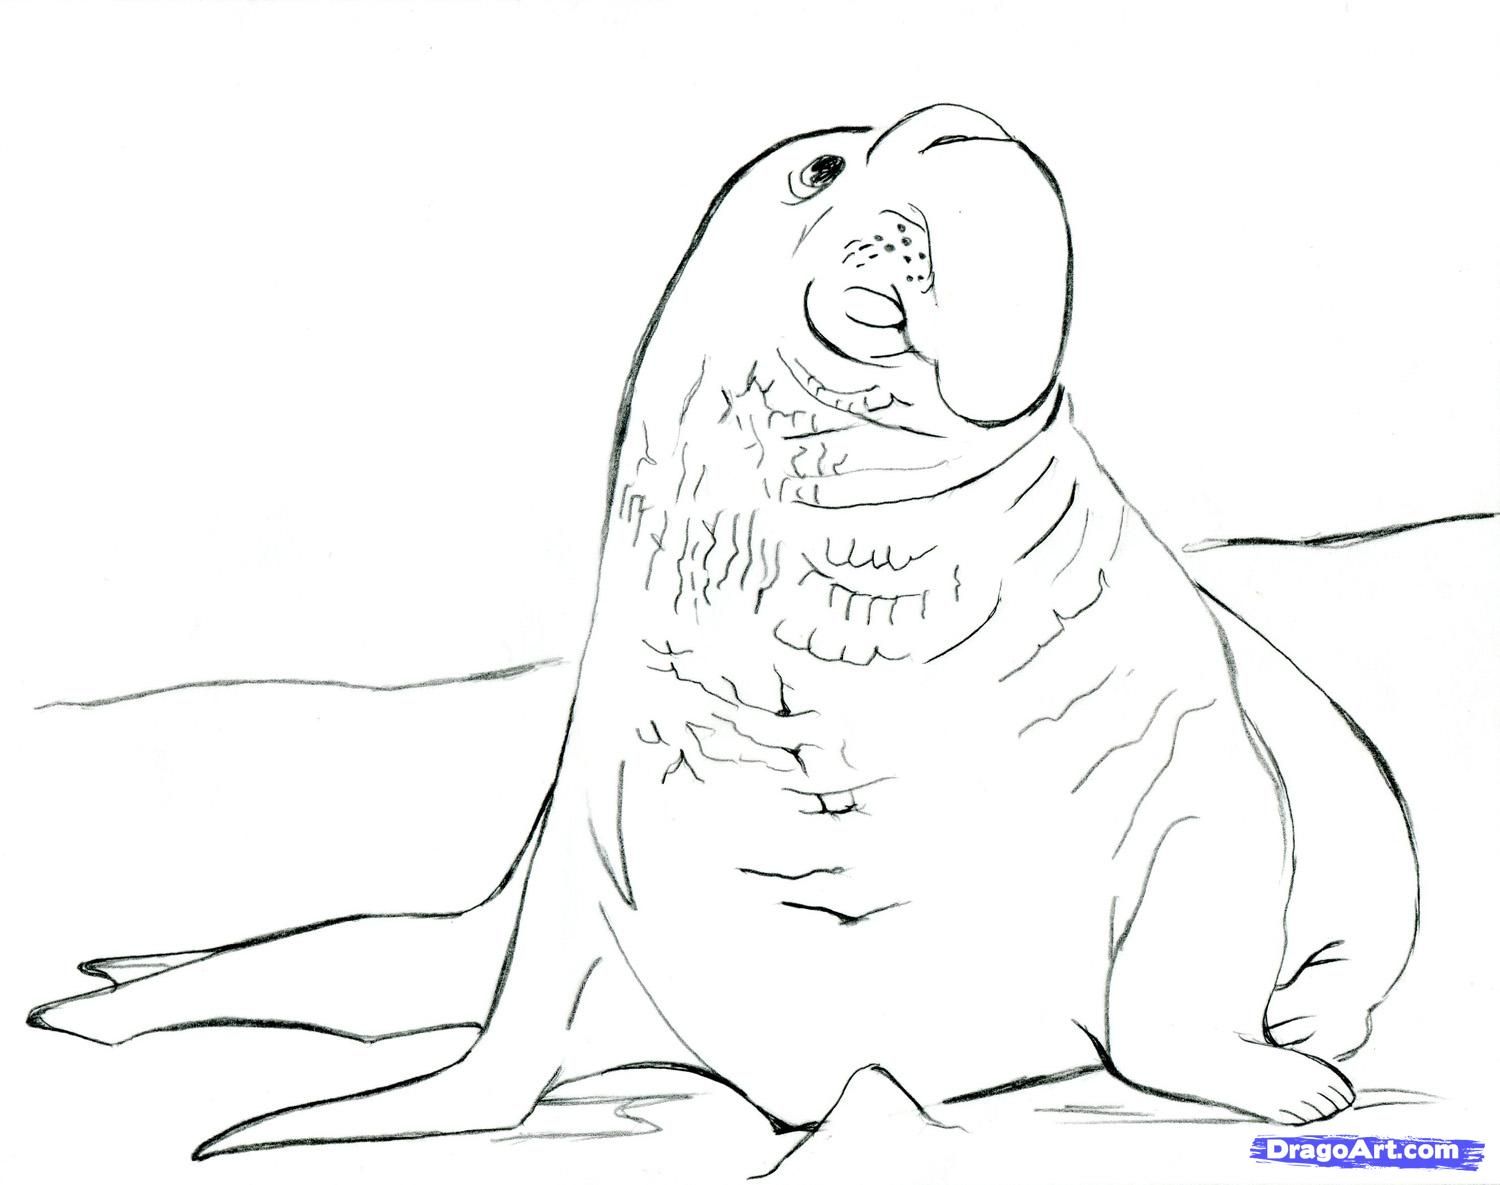 Elephant Seal Coloring Pages - High Quality Coloring Pages